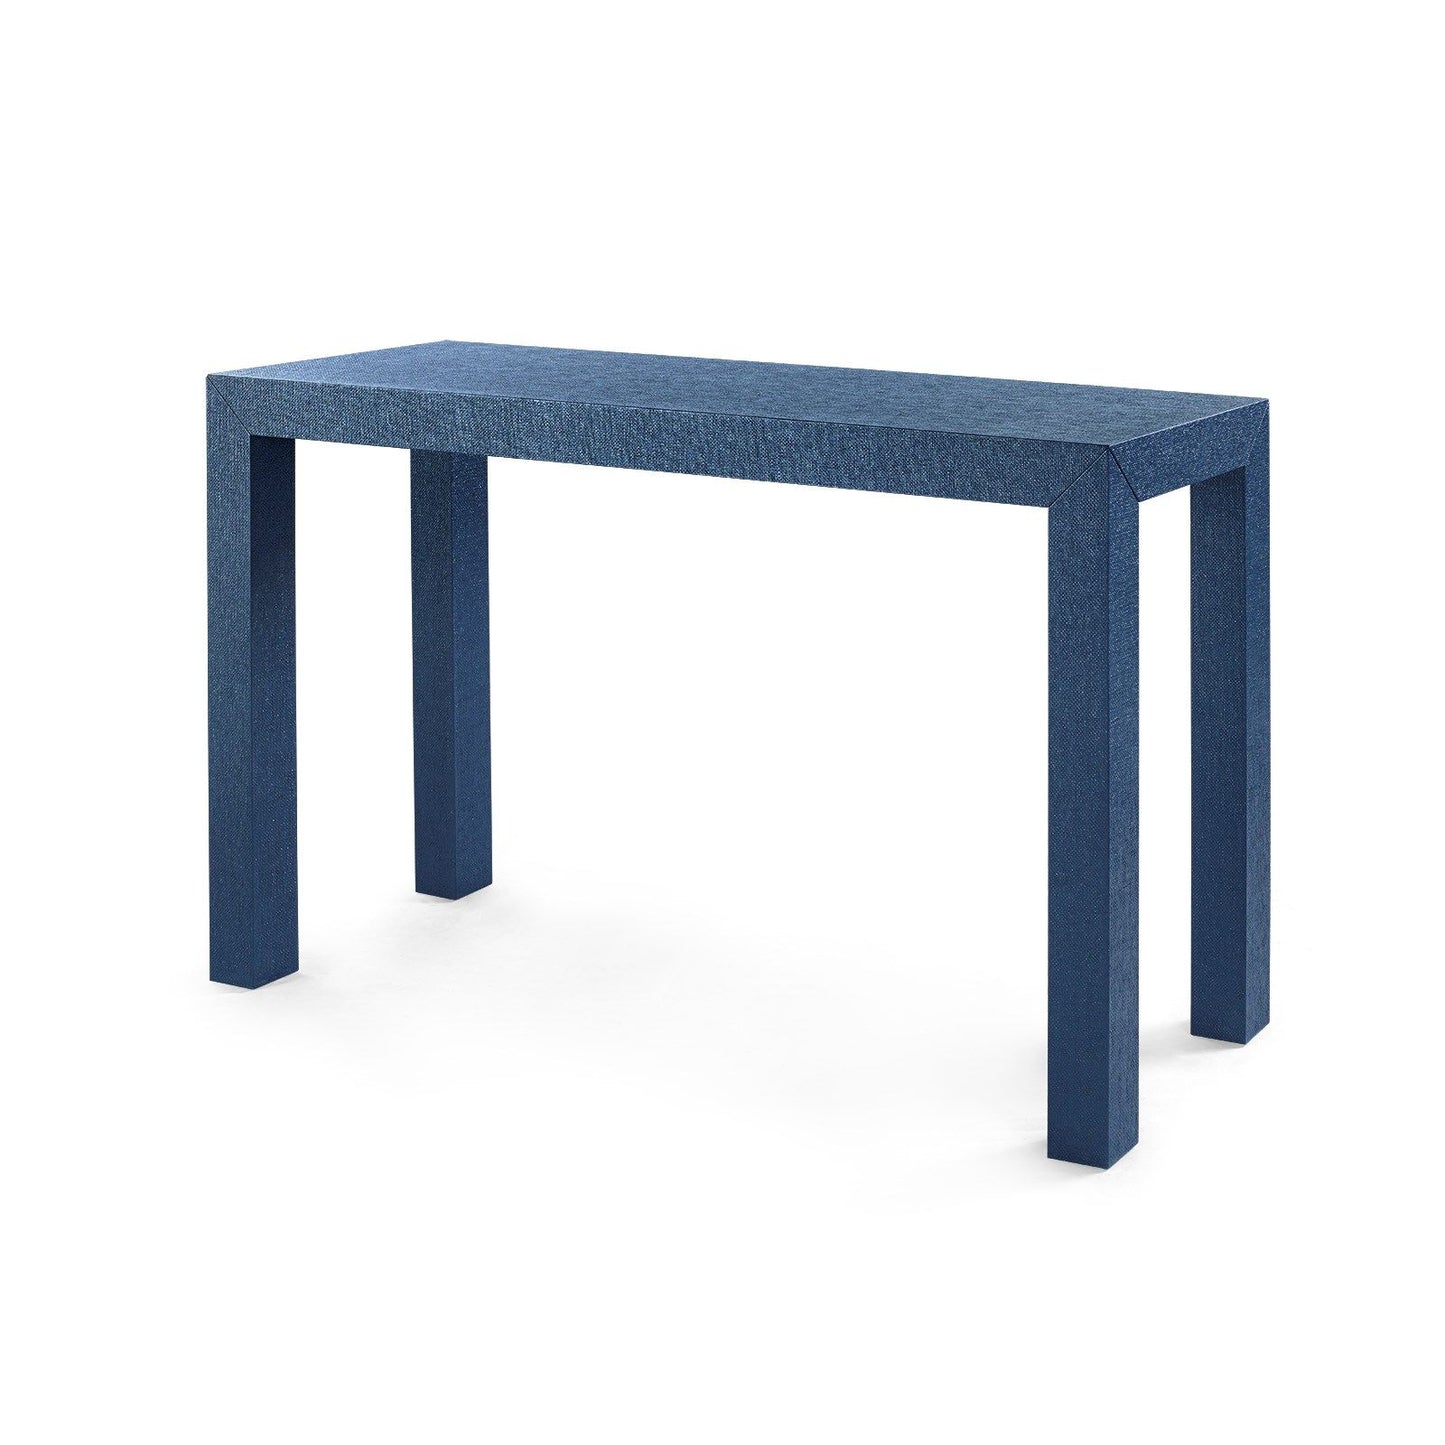 Parsons Console Table Navy BlueTable Bungalow 5  Navy Blue   Four Hands, Burke Decor, Mid Century Modern Furniture, Old Bones Furniture Company, Old Bones Co, Modern Mid Century, Designer Furniture, https://www.oldbonesco.com/